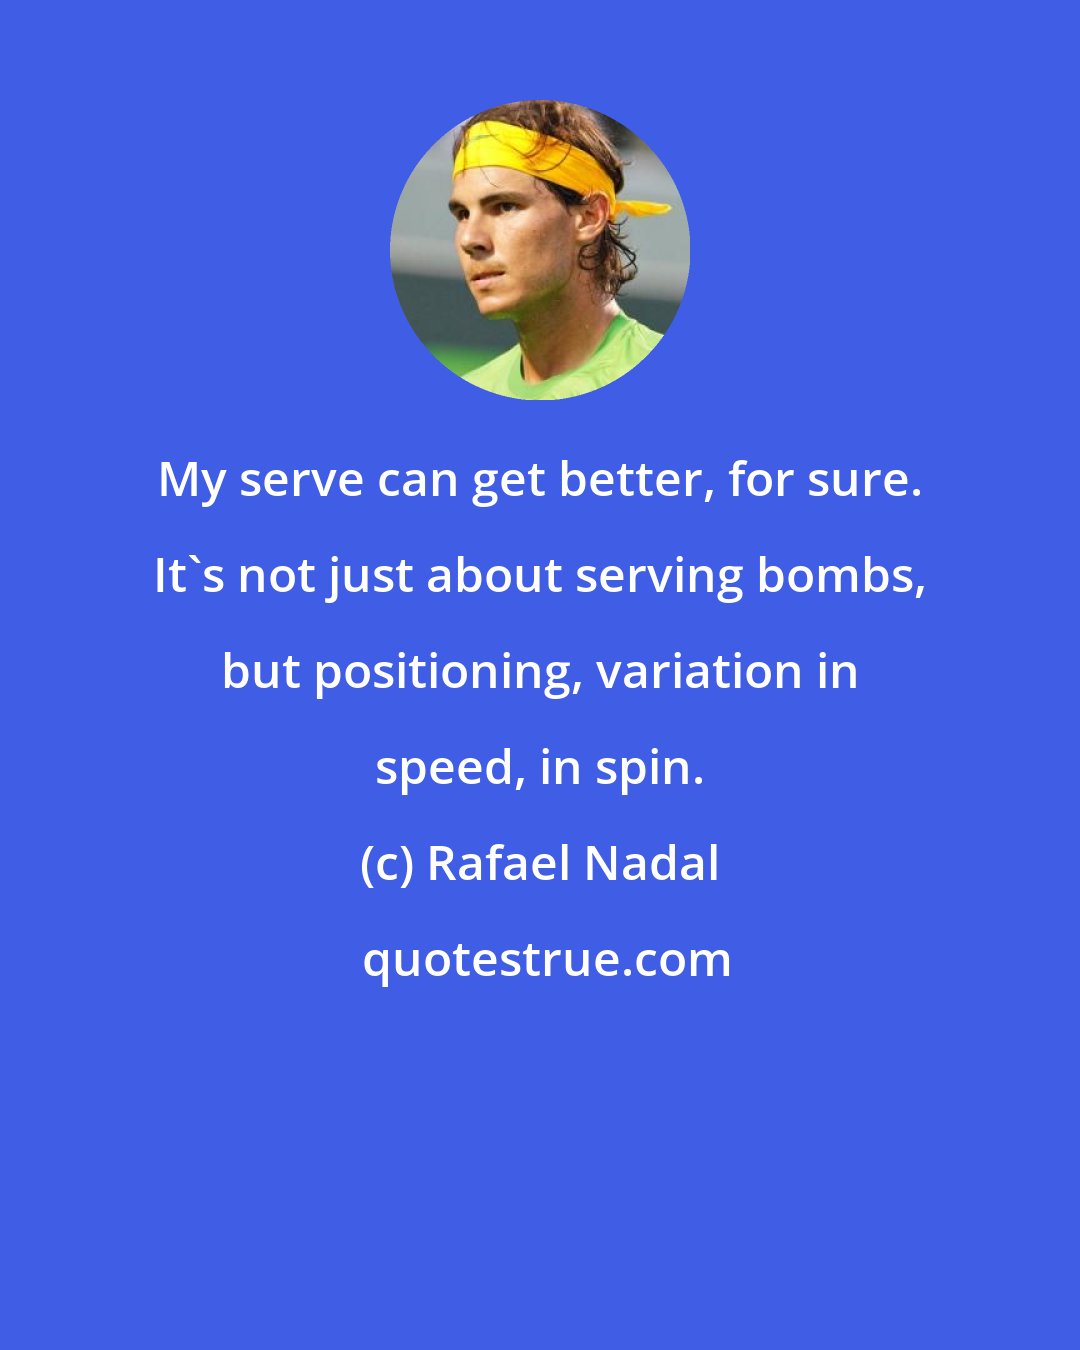 Rafael Nadal: My serve can get better, for sure. It's not just about serving bombs, but positioning, variation in speed, in spin.